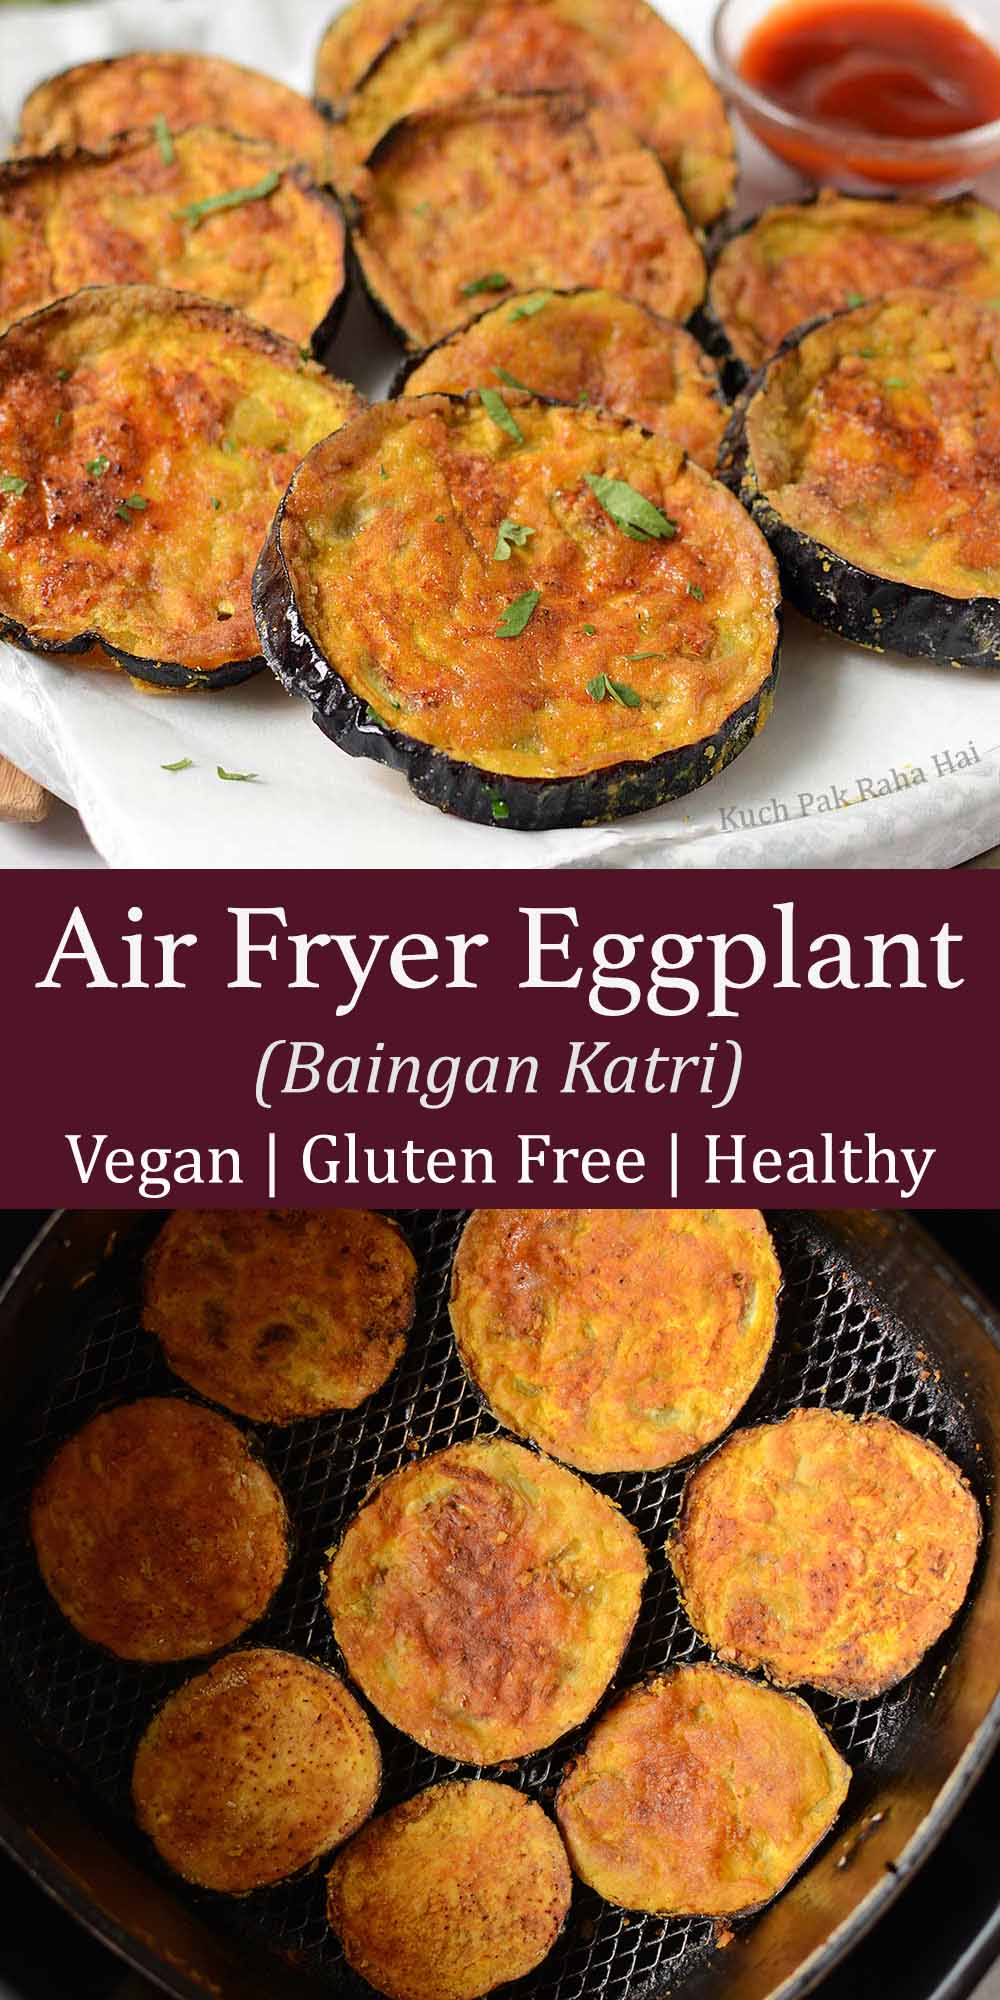 Air Fryer Eggplant without breadcrumbs